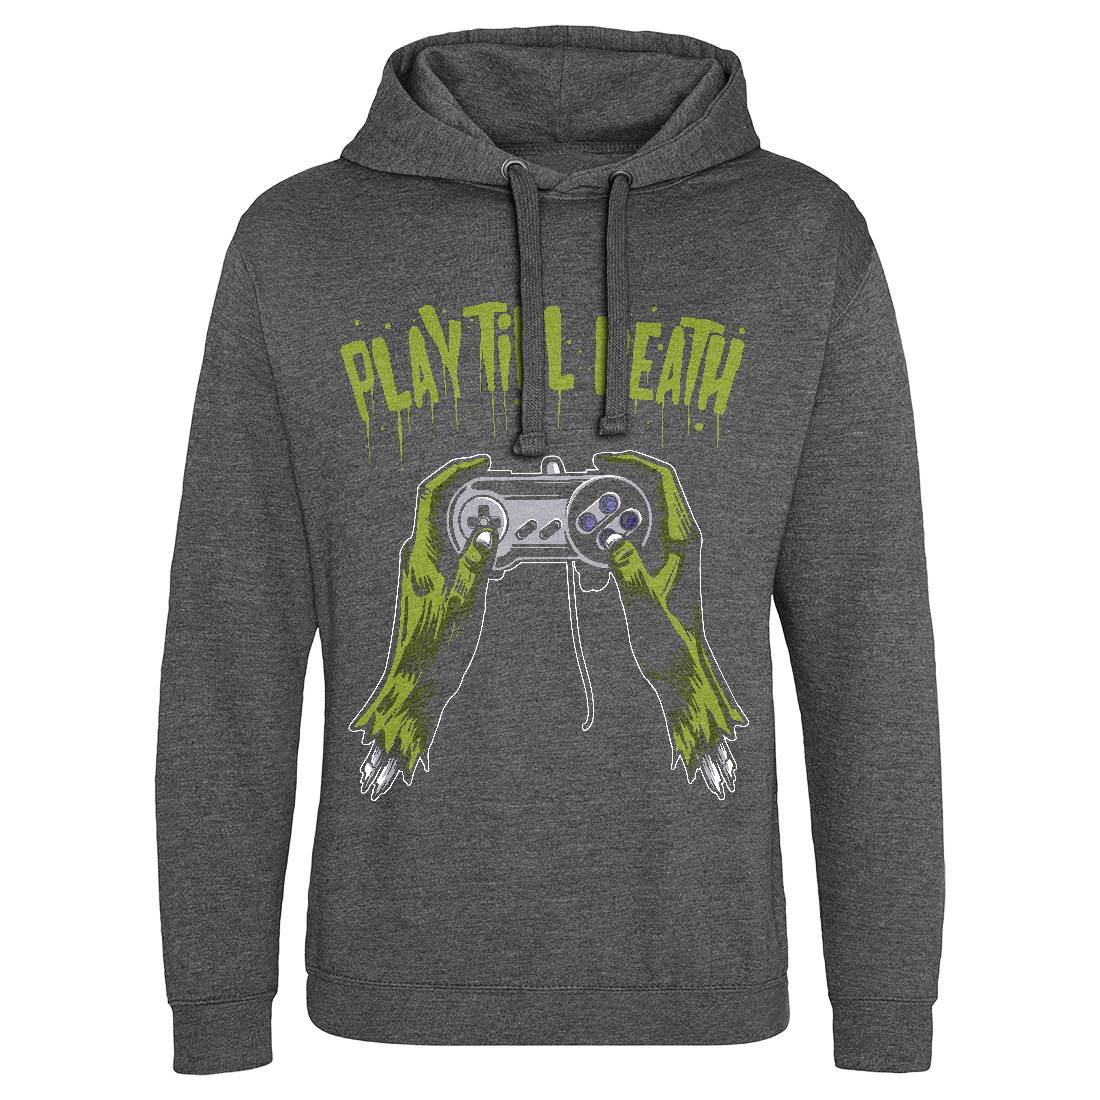 Play Till Death Mens Hoodie Without Pocket Geek A561